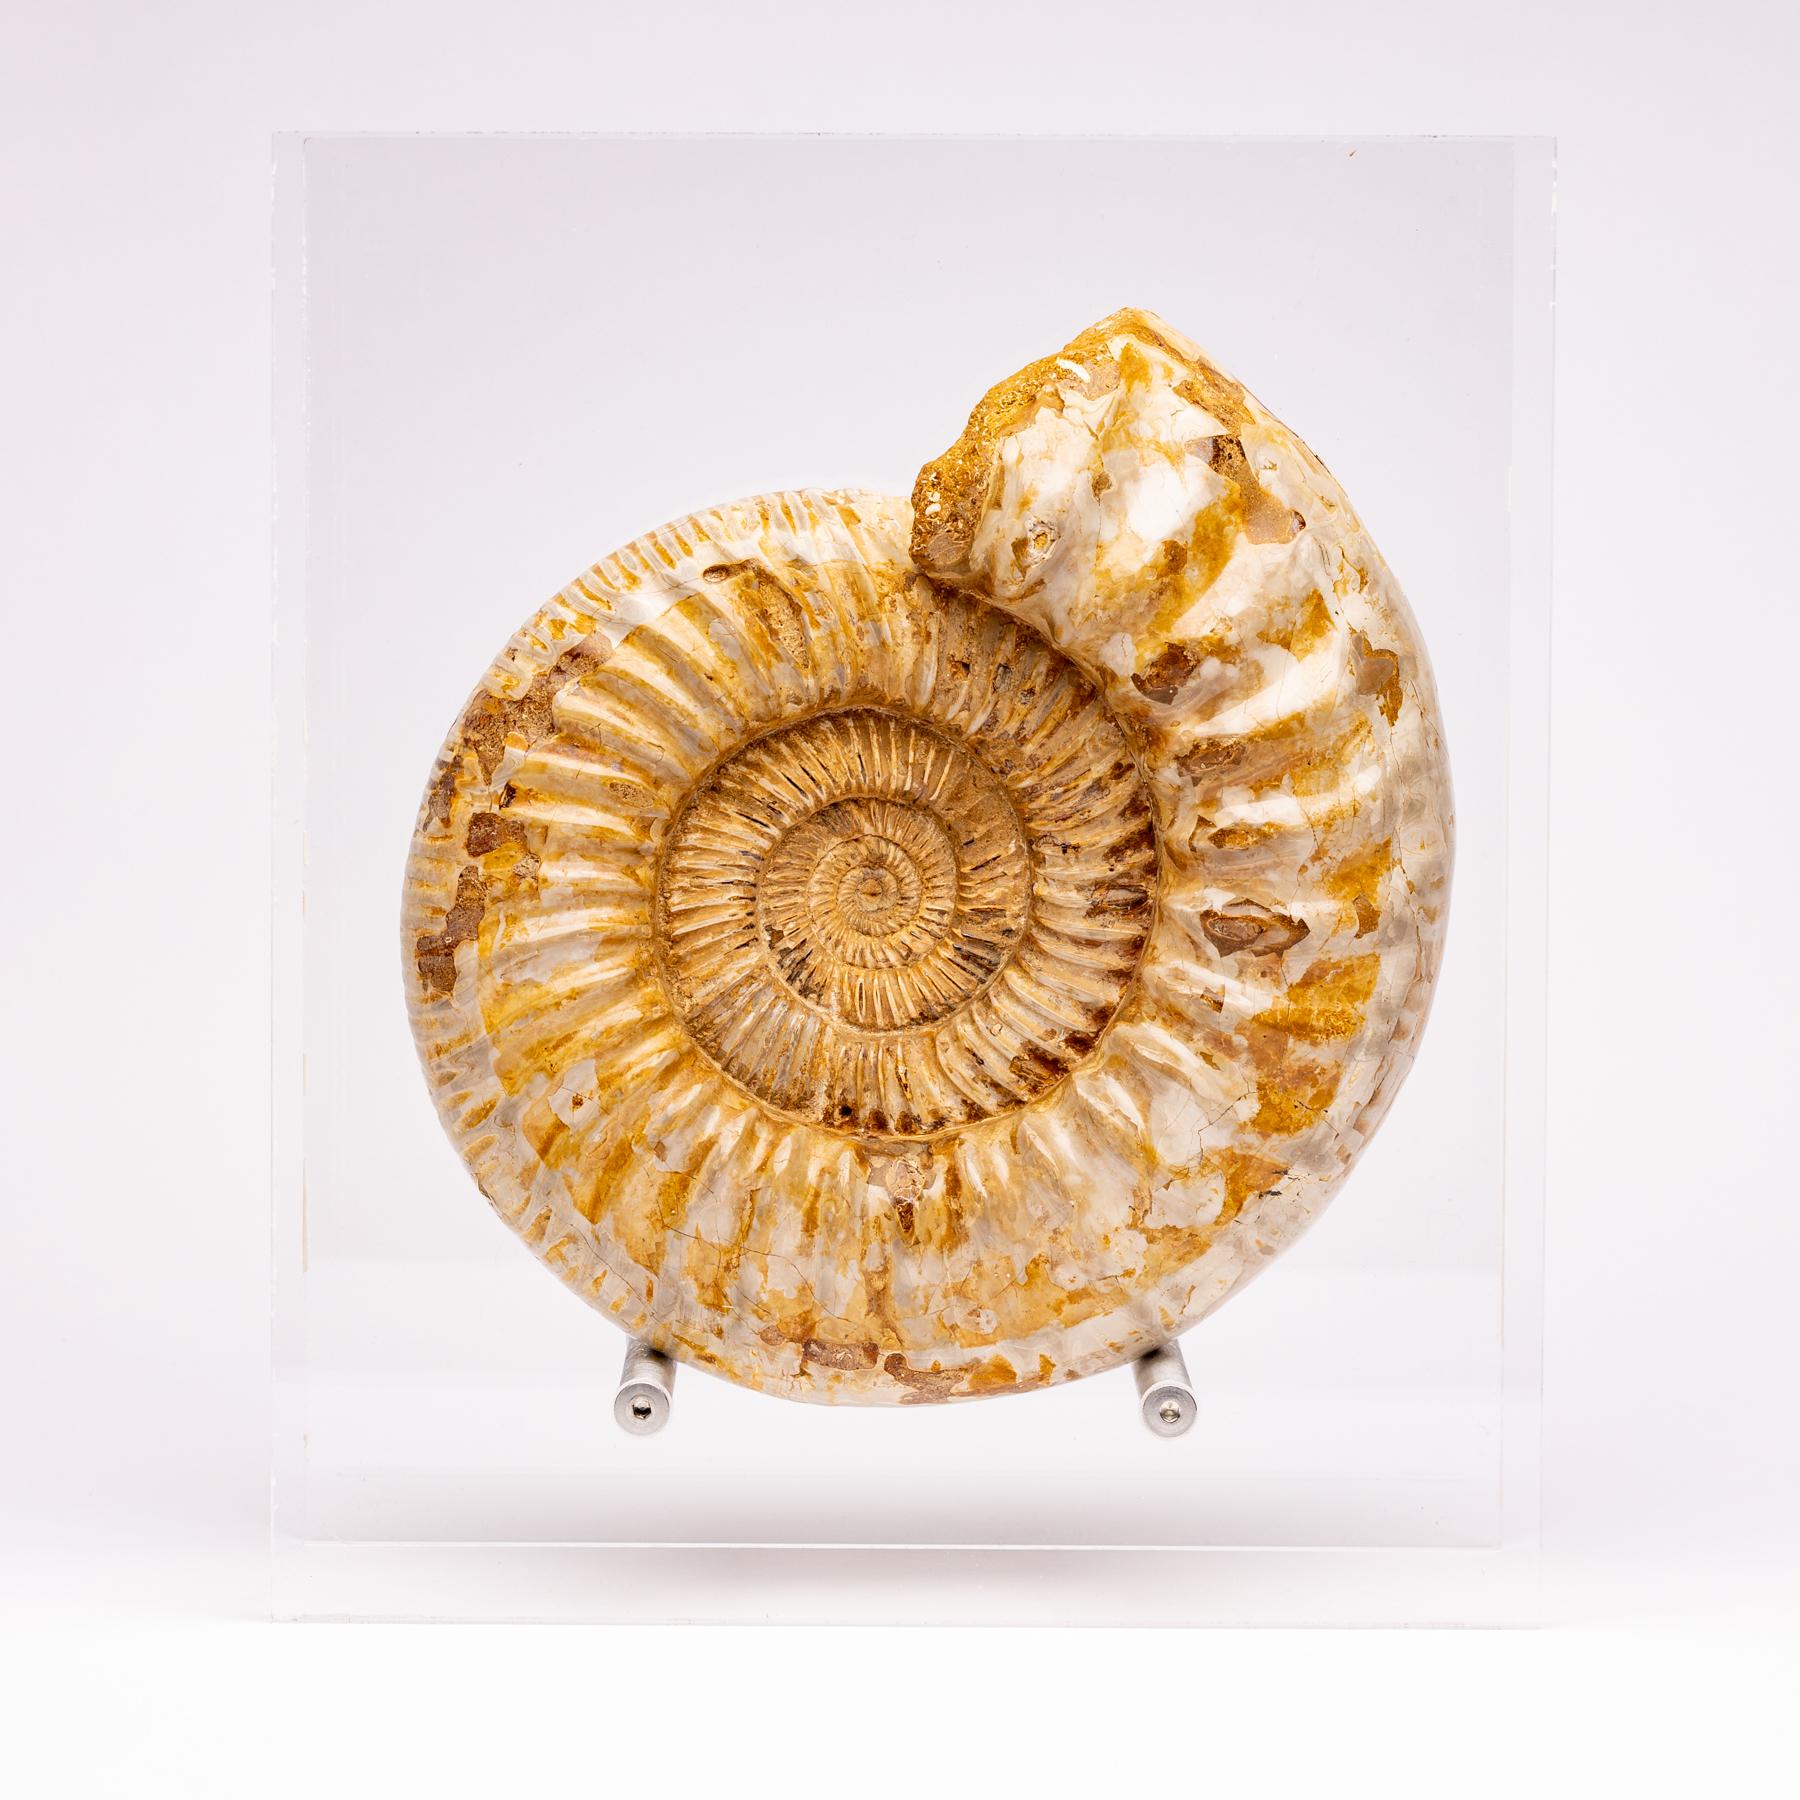 Perisphinctes Ammonite
Period: Jurassic 163 - 145 Million years ago.
These ammonites could grow from anywhere between 10 mm to over a meter in diameter, making them among the largest of the ammonites.
Ammonites were squid-like predatory creatures